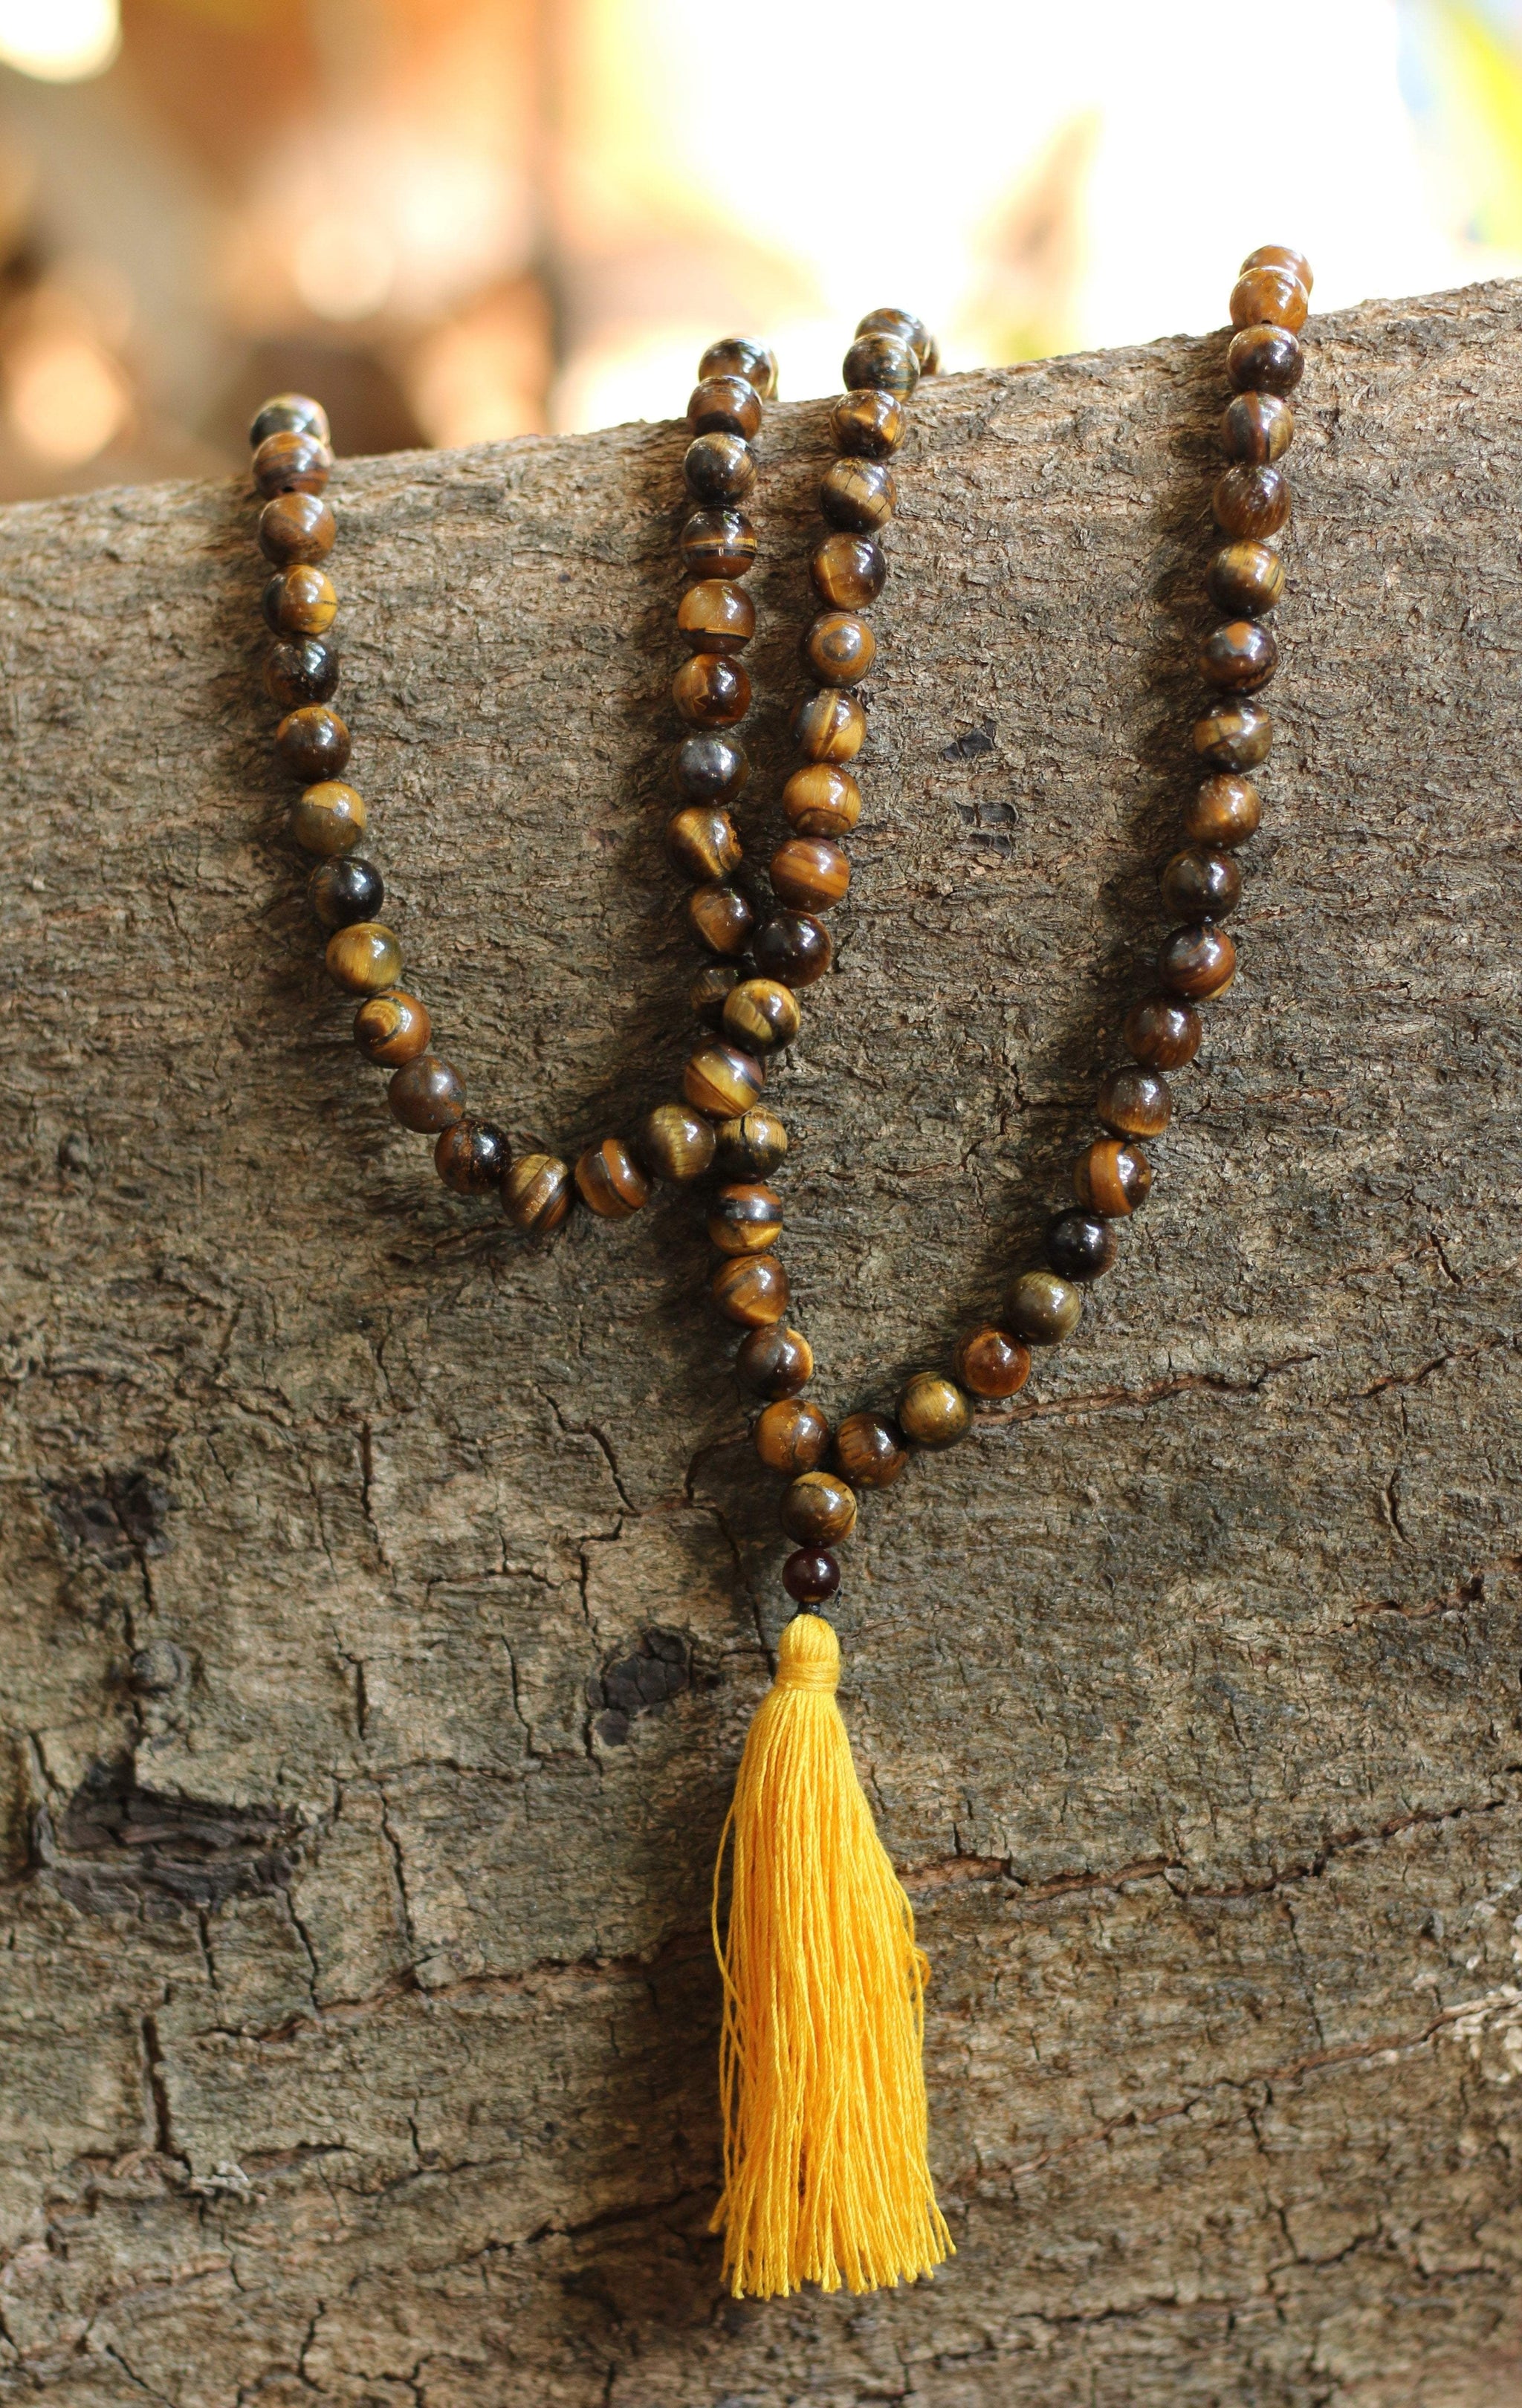 Mala Beads Blessed By Monks 2024